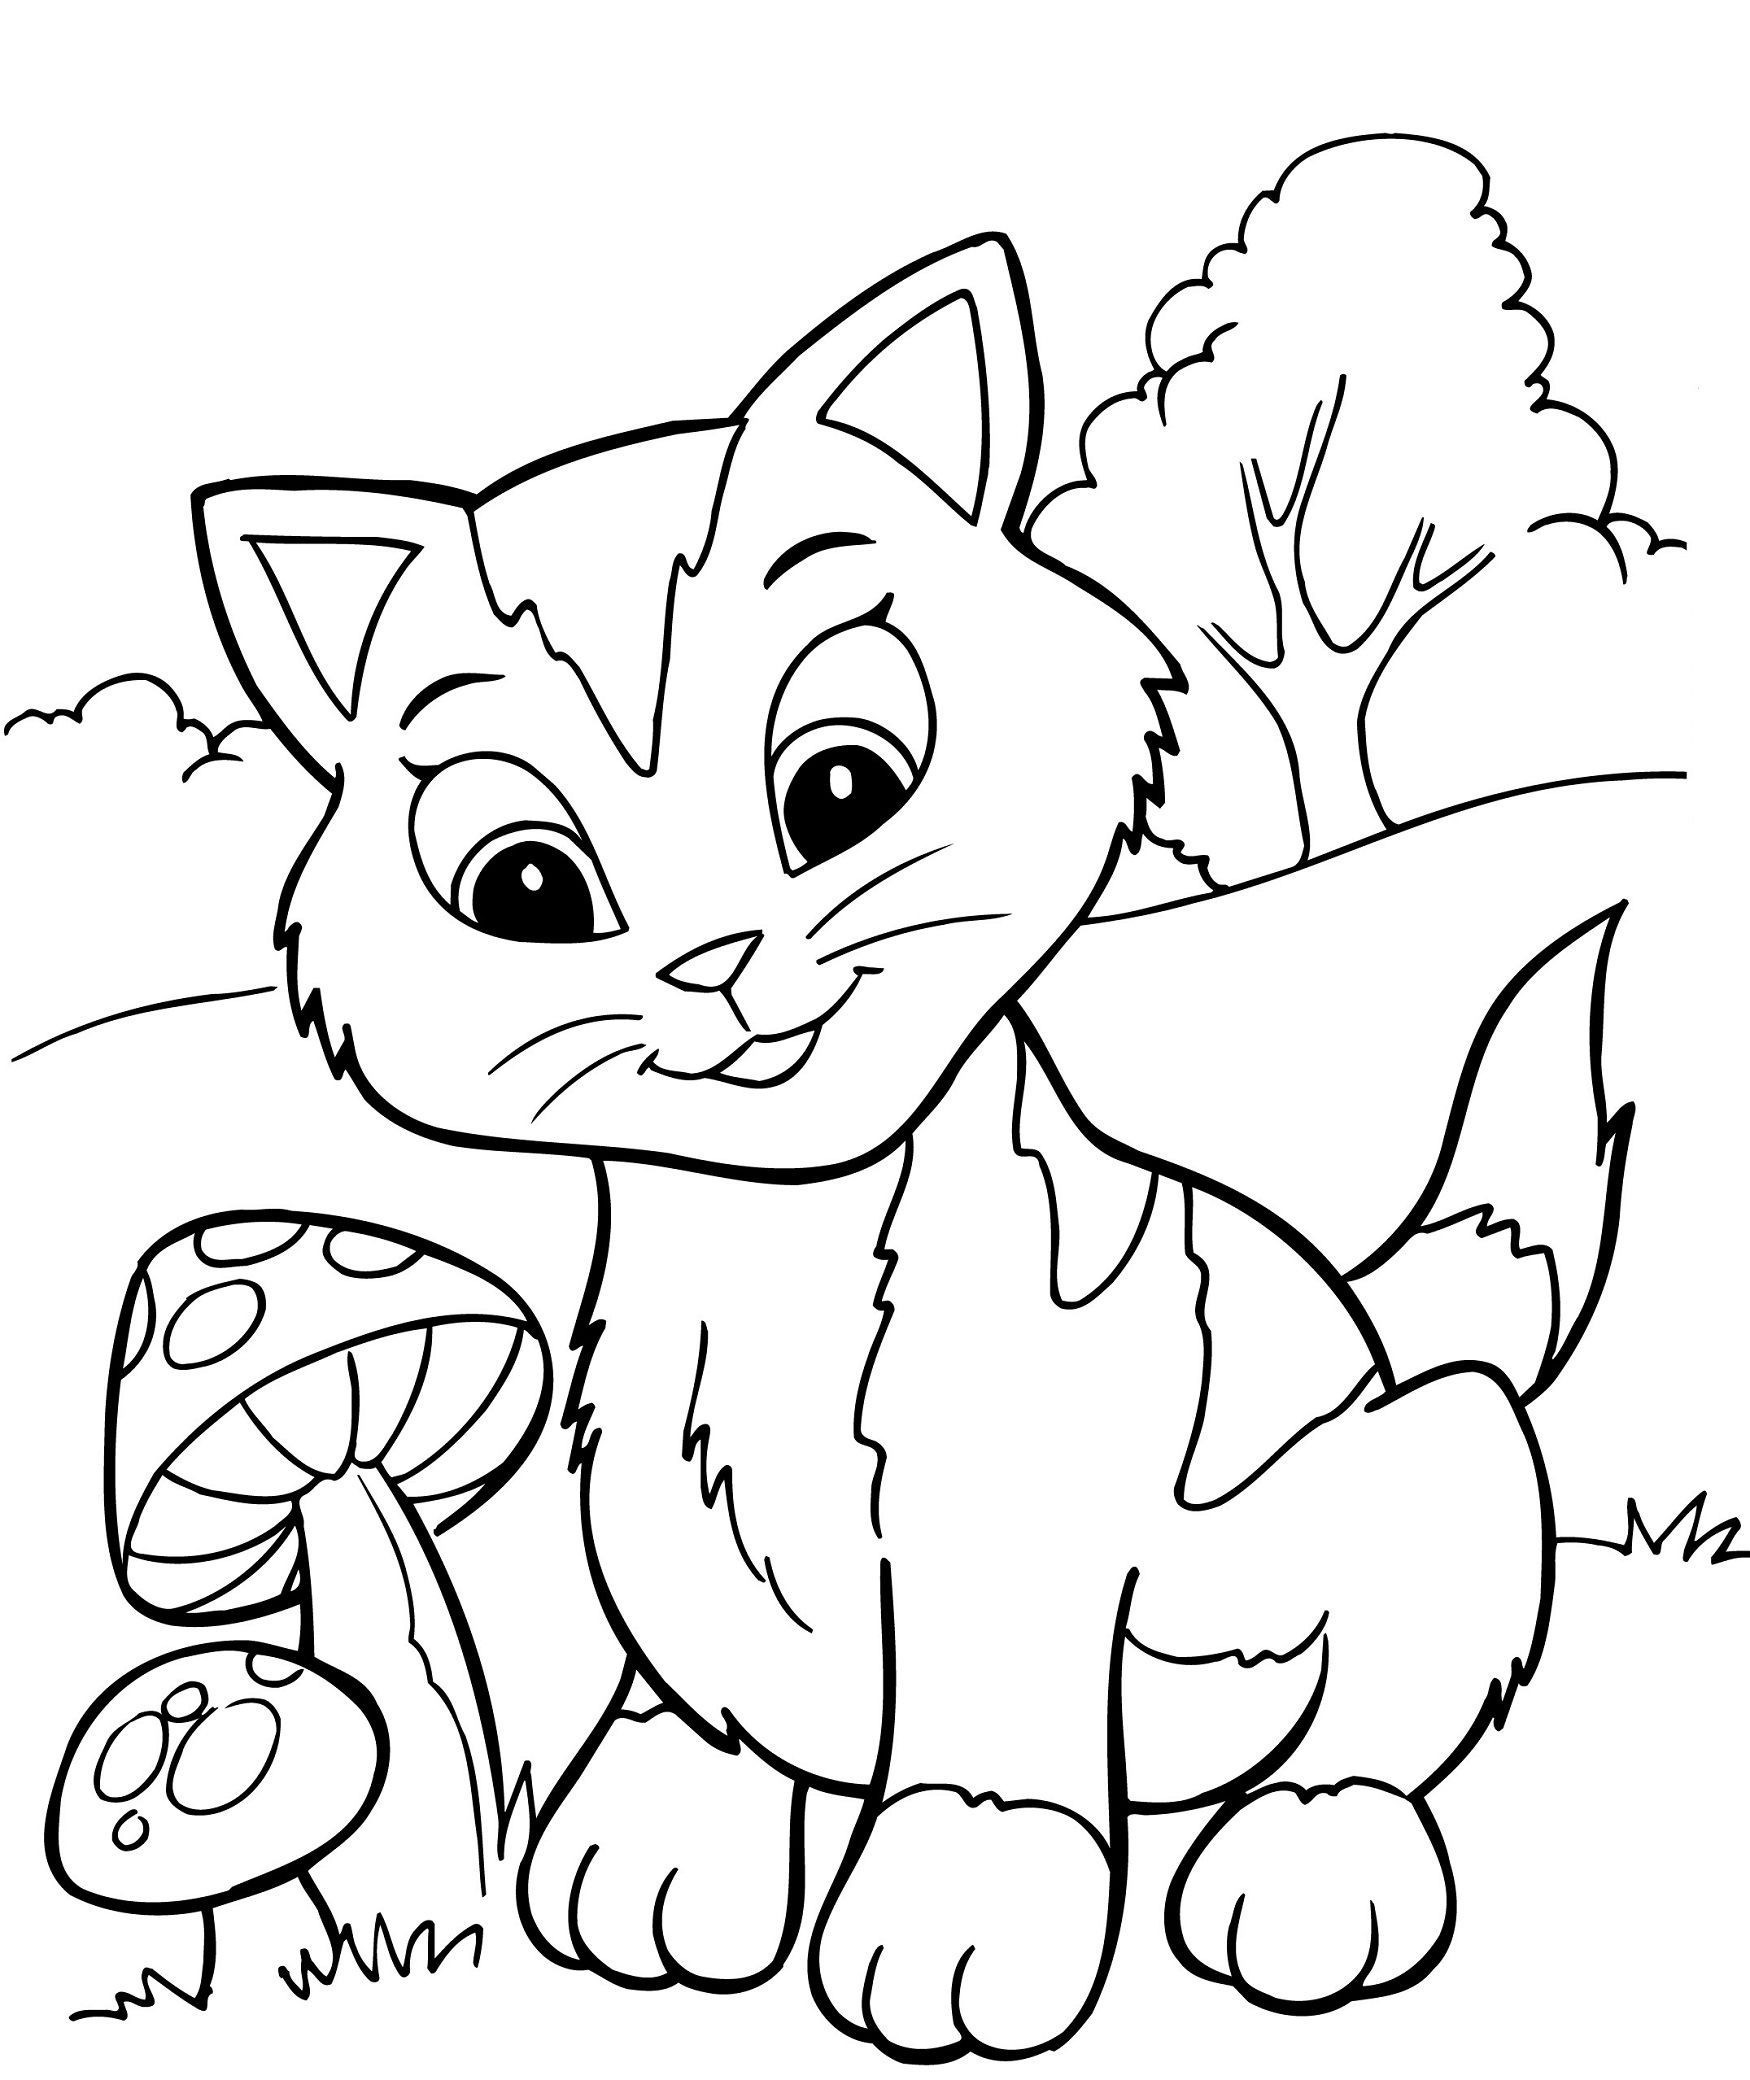 Baby Cat Printable Coloring Pages - znatok.biz